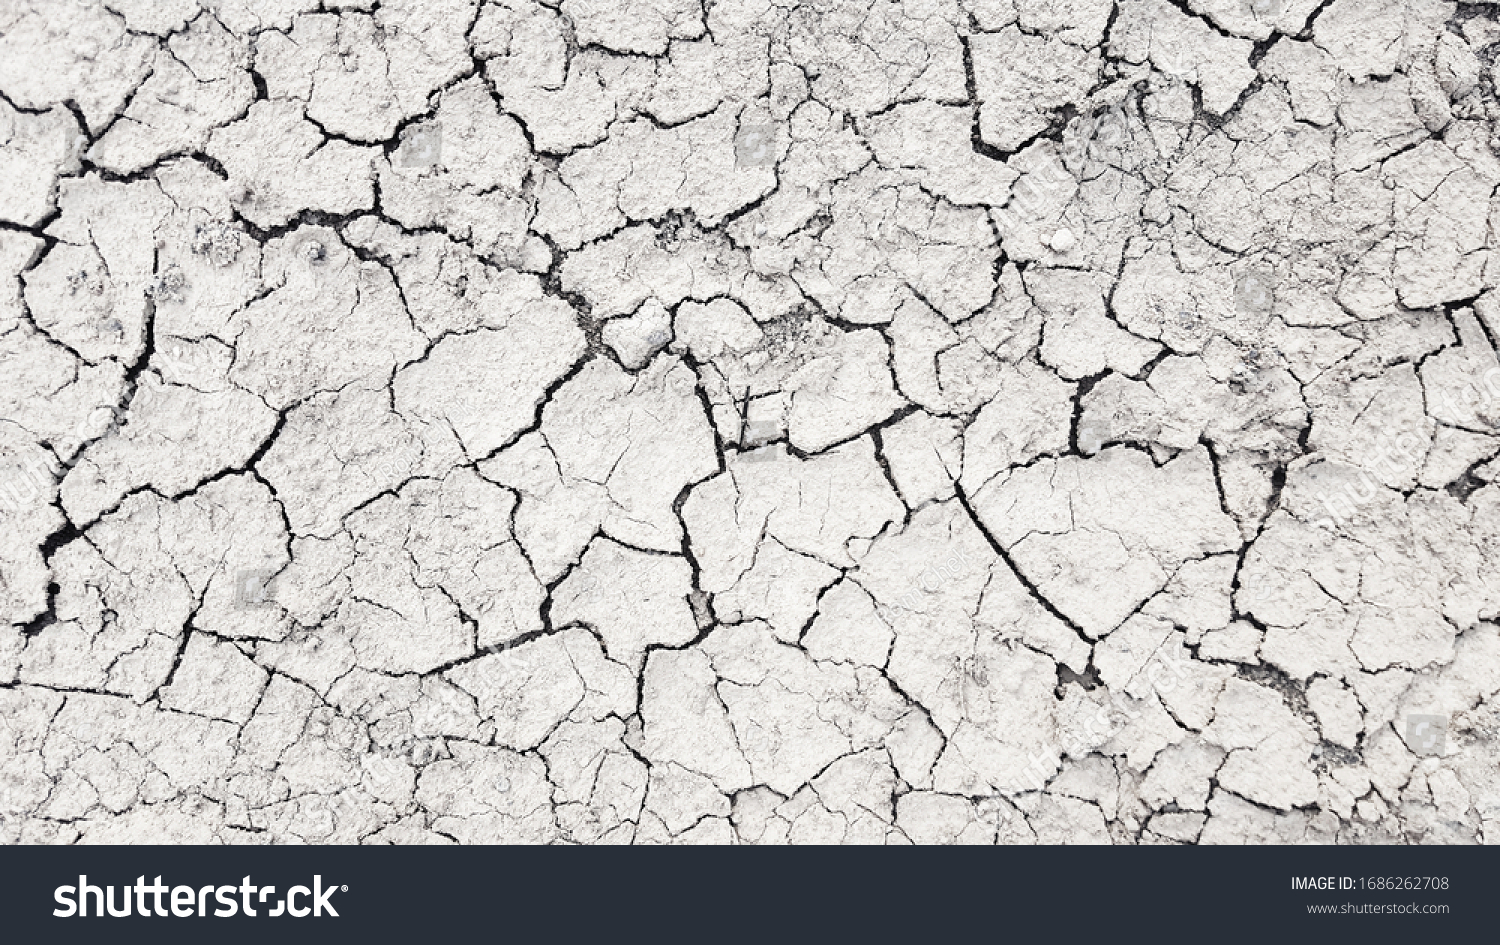 Dry mud cracked ground texture. Drought season background #1686262708